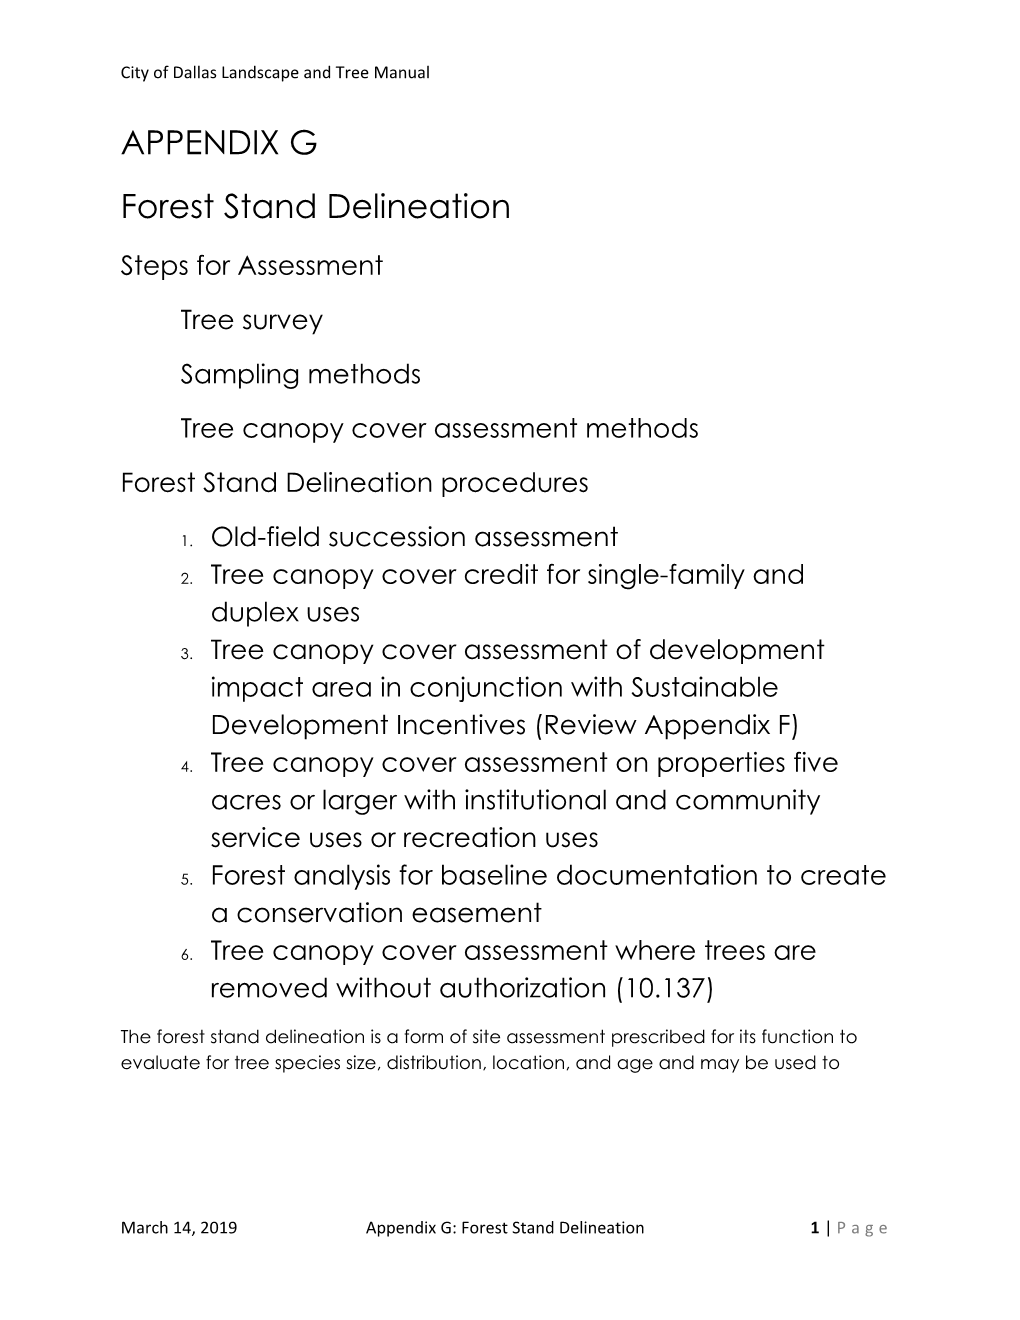 Forest Stand Delineation